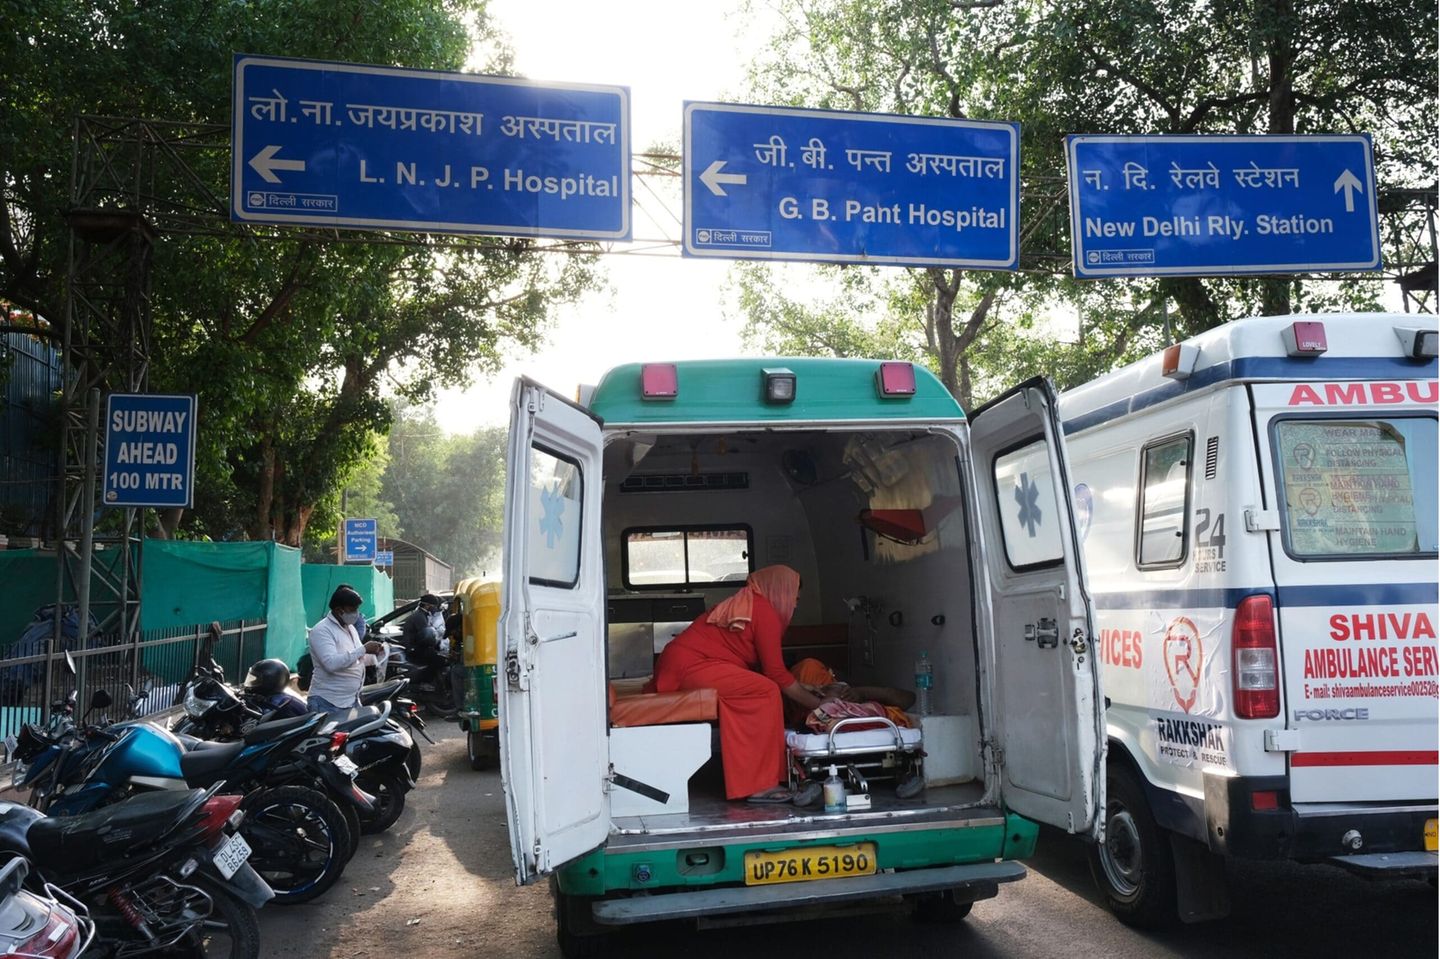 A Covid-19 patient is attended to in ambulance while waiting at the main entrance of the Lok Nayayak Jaiprakash Hospital in New Delhi, India, on Sunday, April 25, 2021. Noting that at least six high courts are hearing disputes about Covid-19 management including oxygen shortages, the Supreme Court on Thursday asked India's federal government to come up with a national plan for the distribution of essential supplies and services.